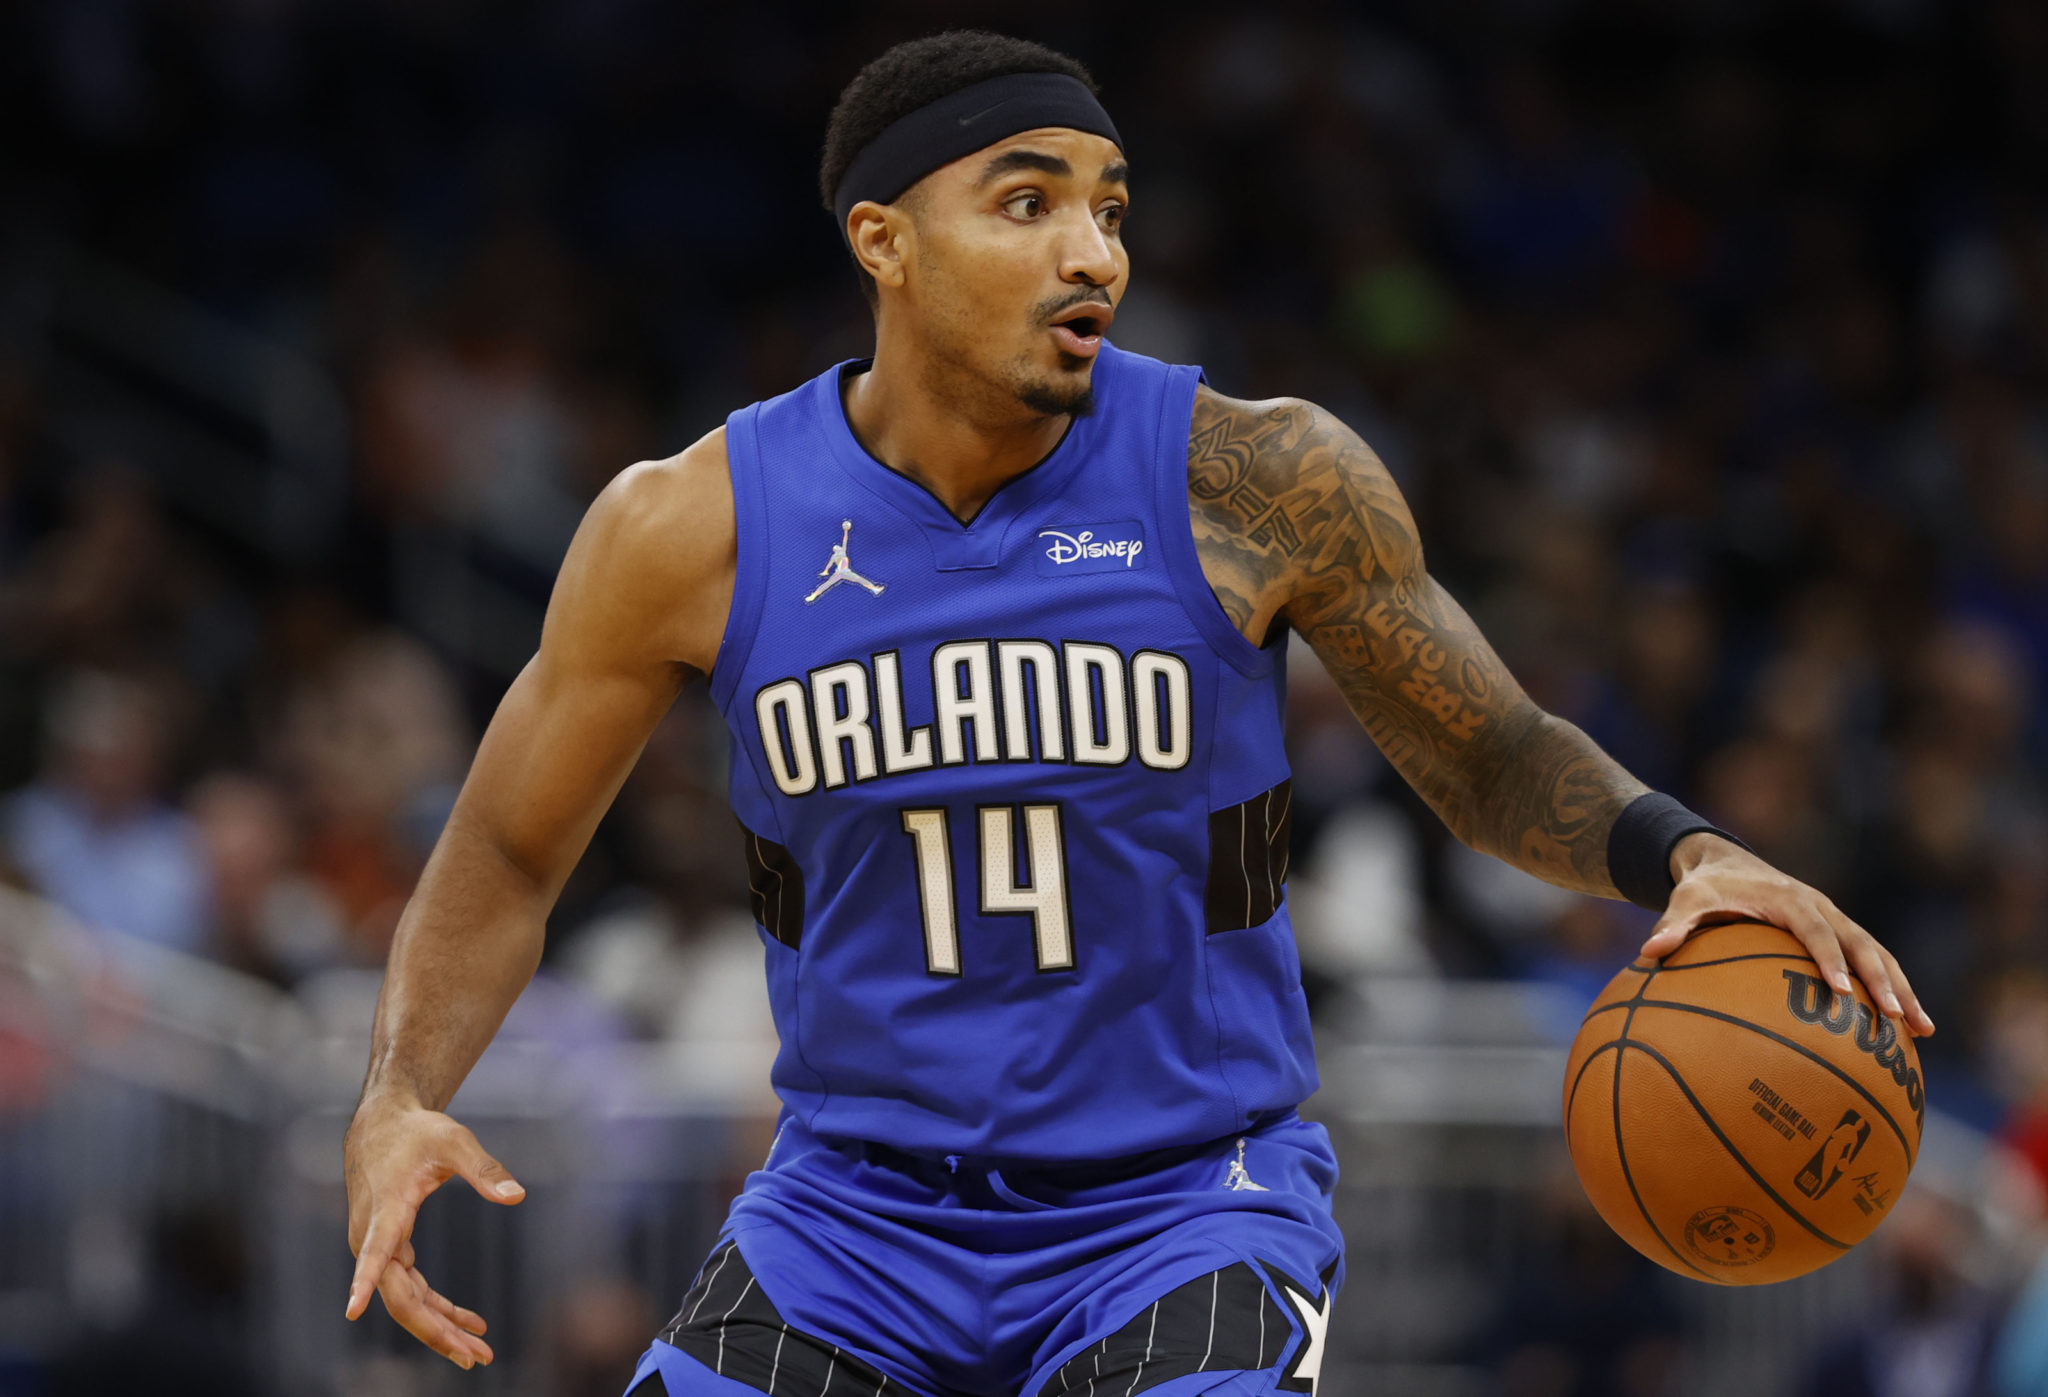 Gary Harris Injury Update: Latest on Orlando Magic guard's availability for Game 6 (May 3) - Gary Harris Injury: Details and Severity